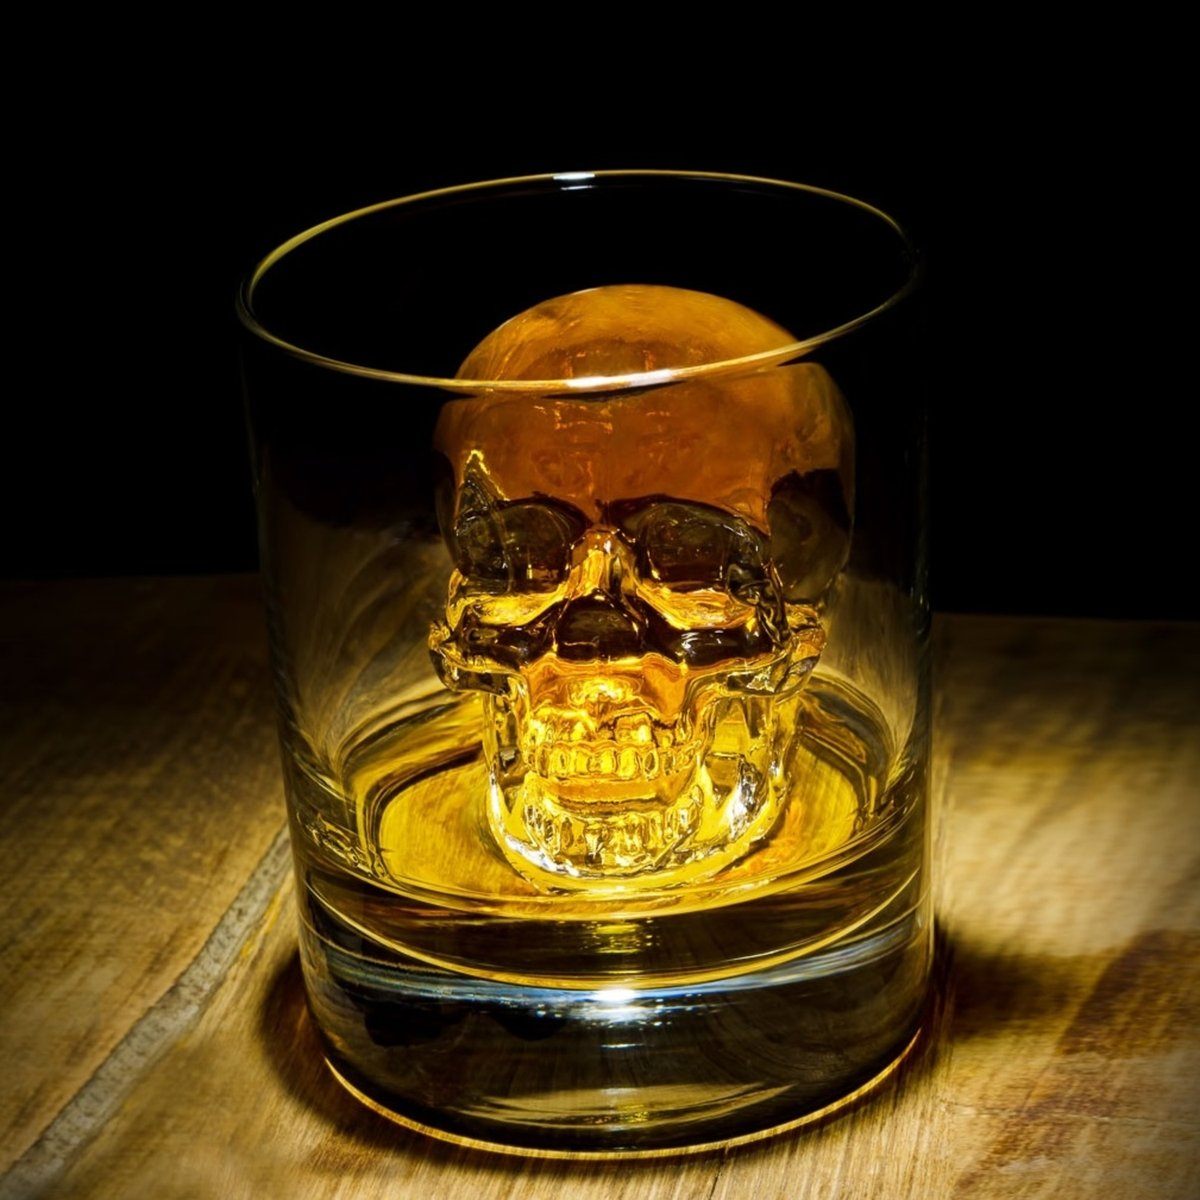 Make Any Drink More Curious With Skull-Shaped Ice - Gastro Obscura